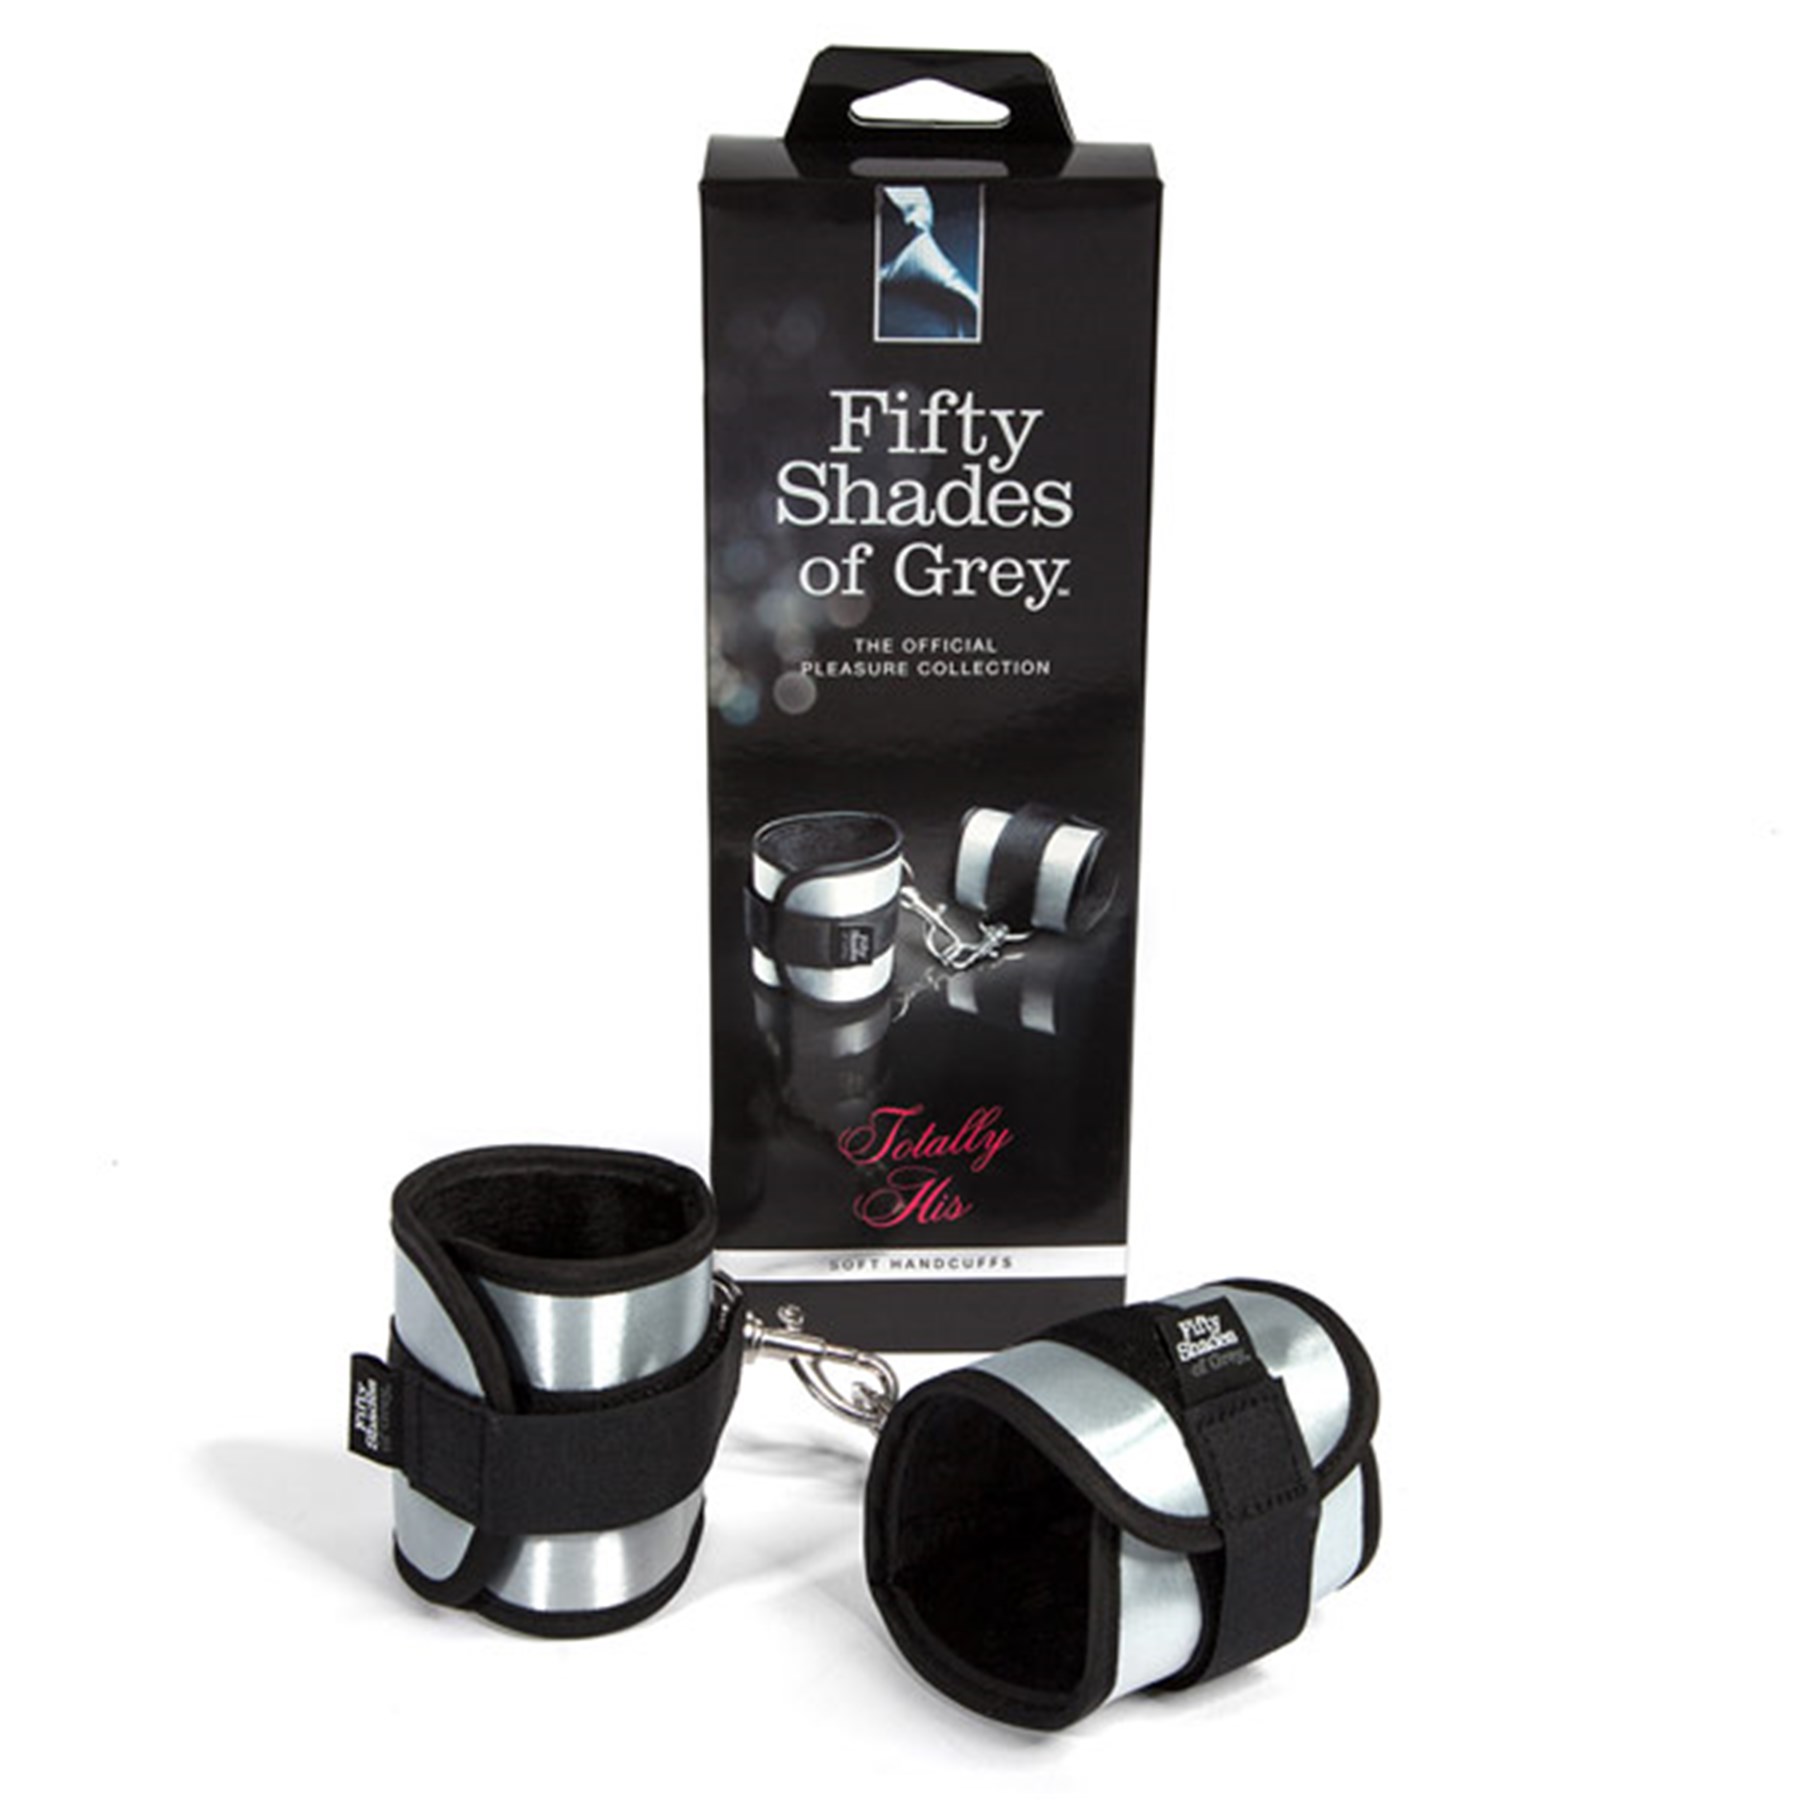 Fifty Shades Of Grey Totally His Handcuffs